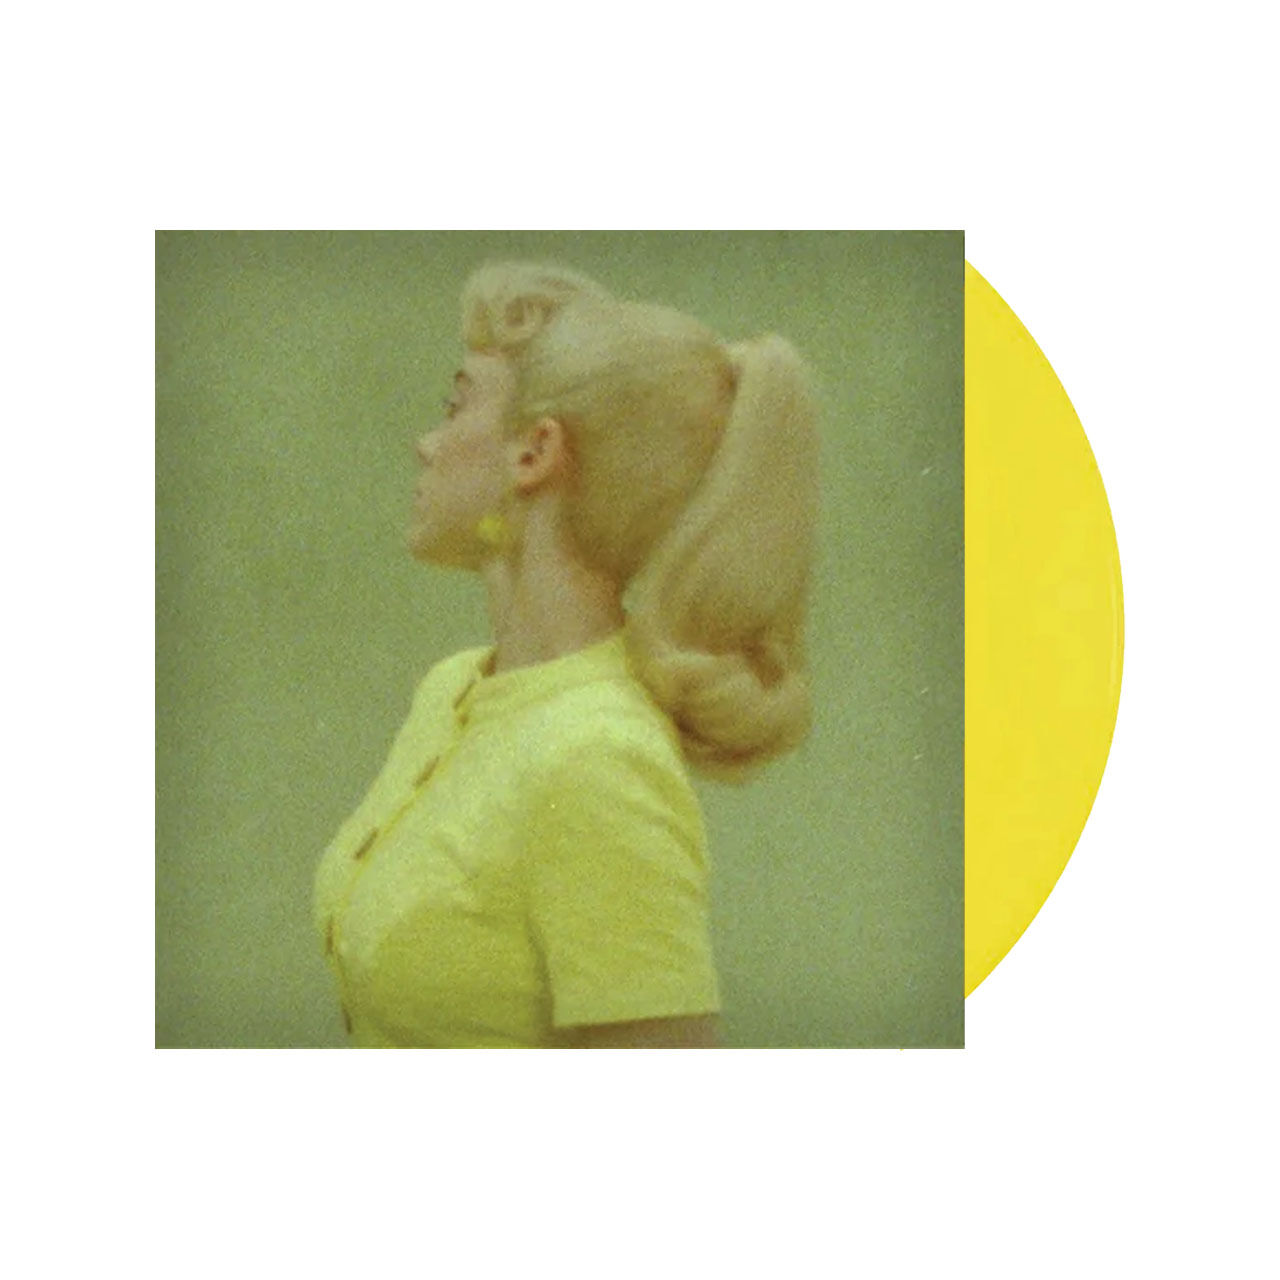 BILLIE EILISH What Was I Made For? Yellow 7inch Vinyl